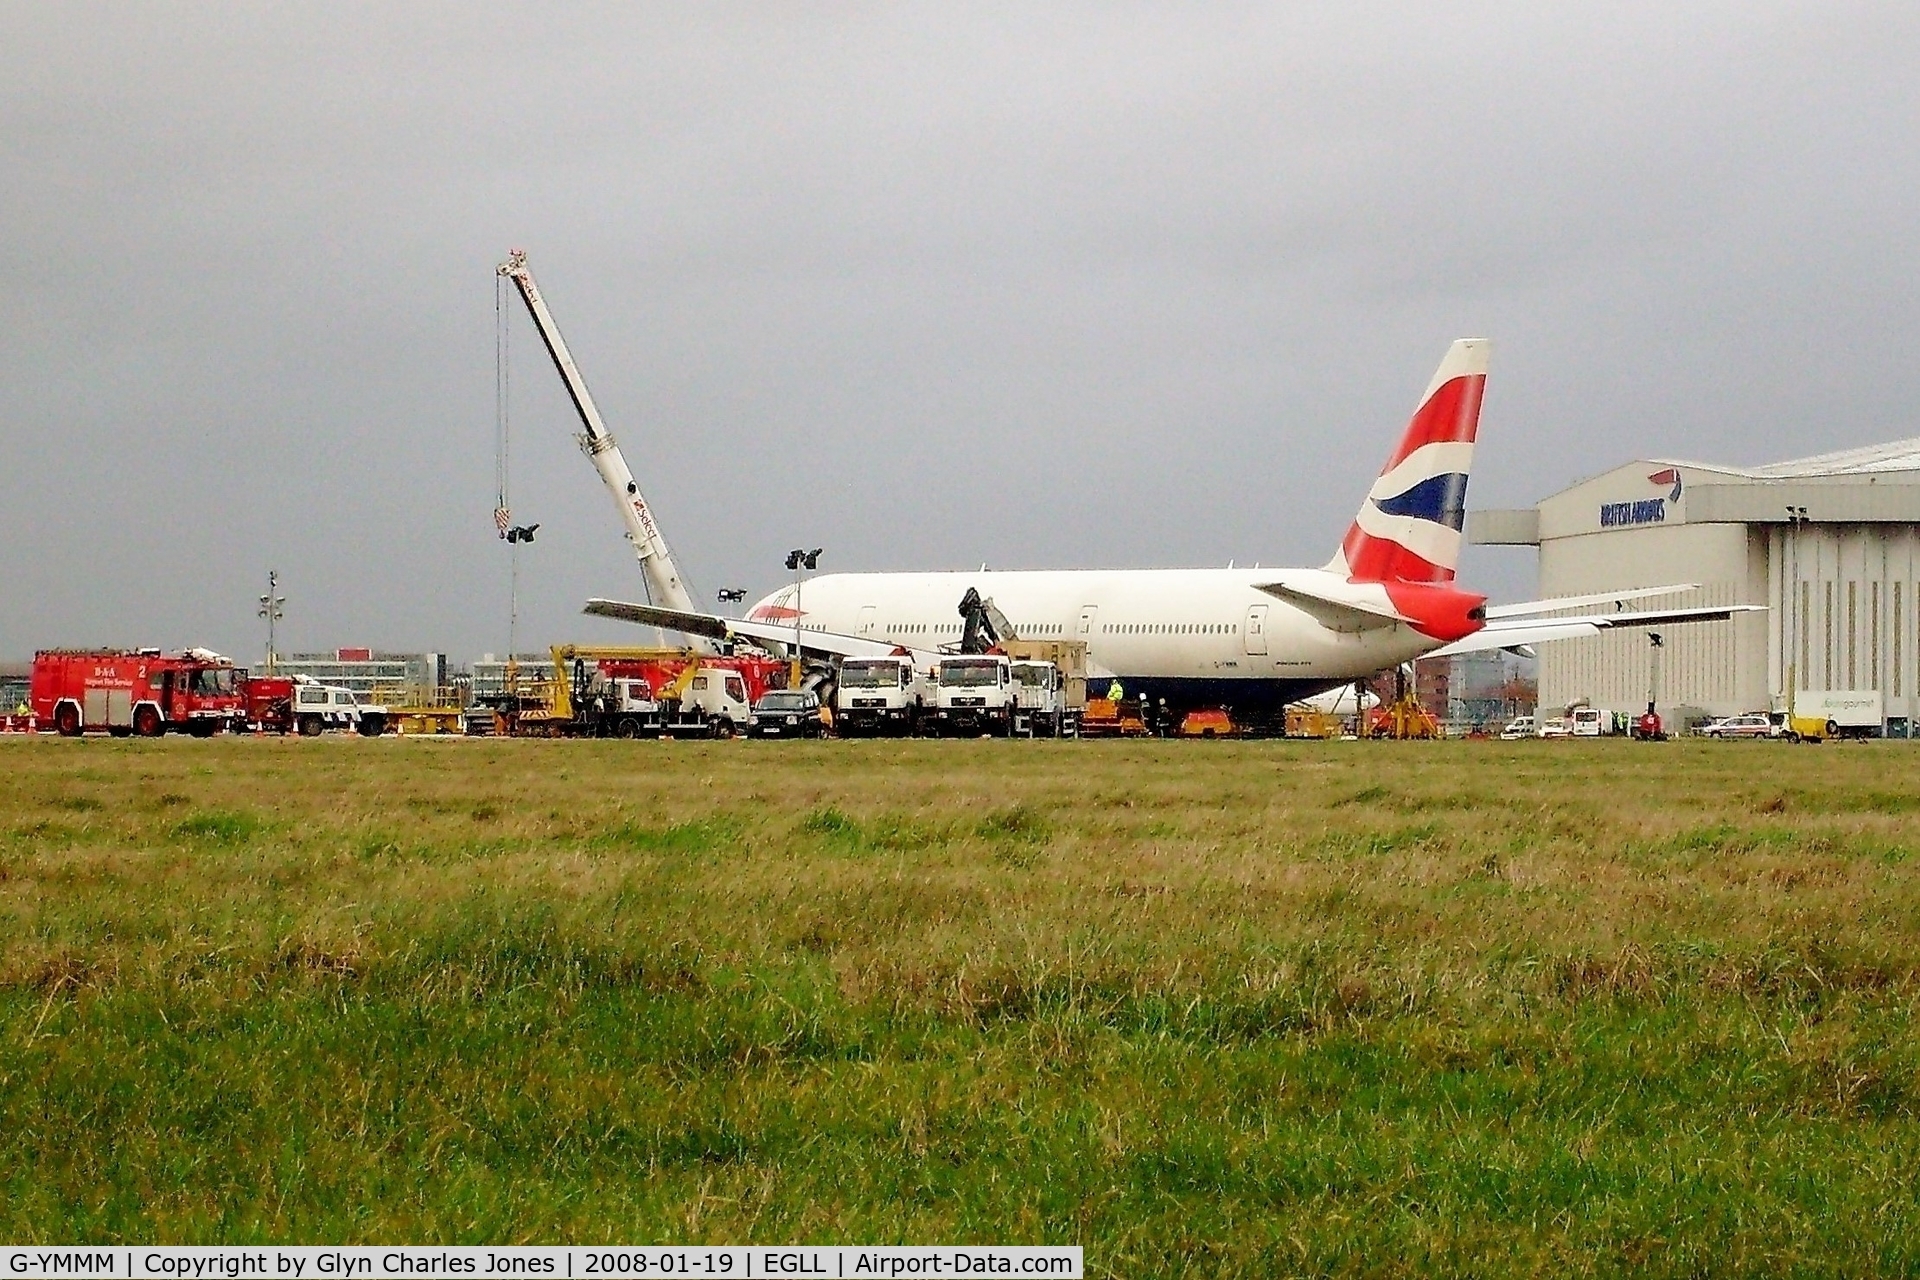 G-YMMM, 2001 Boeing 777-236/ER C/N 30314/342, Two days after the miraculous crash landing on 17th January 2008 whilst operating British Airways flight BA038 from Beijing and the crane has lifted the left wing. It has now been written off and broken up at London-Heathrow in 2009.